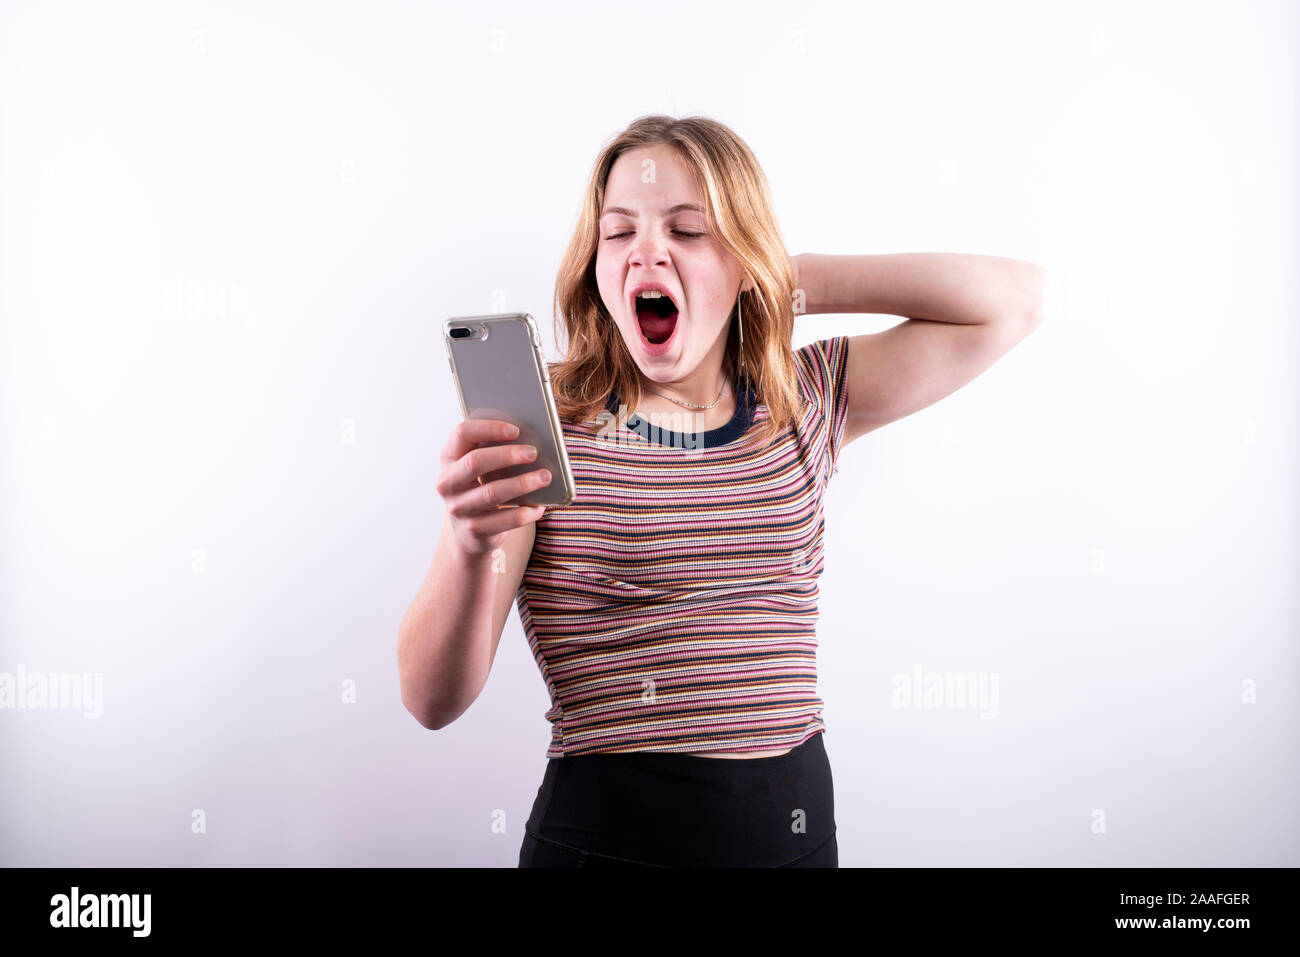 Caucasian teenage girl wearing a horizontal striped T-shirt and yawning with boredom while looking at a smartphone against a white background Stock Photo